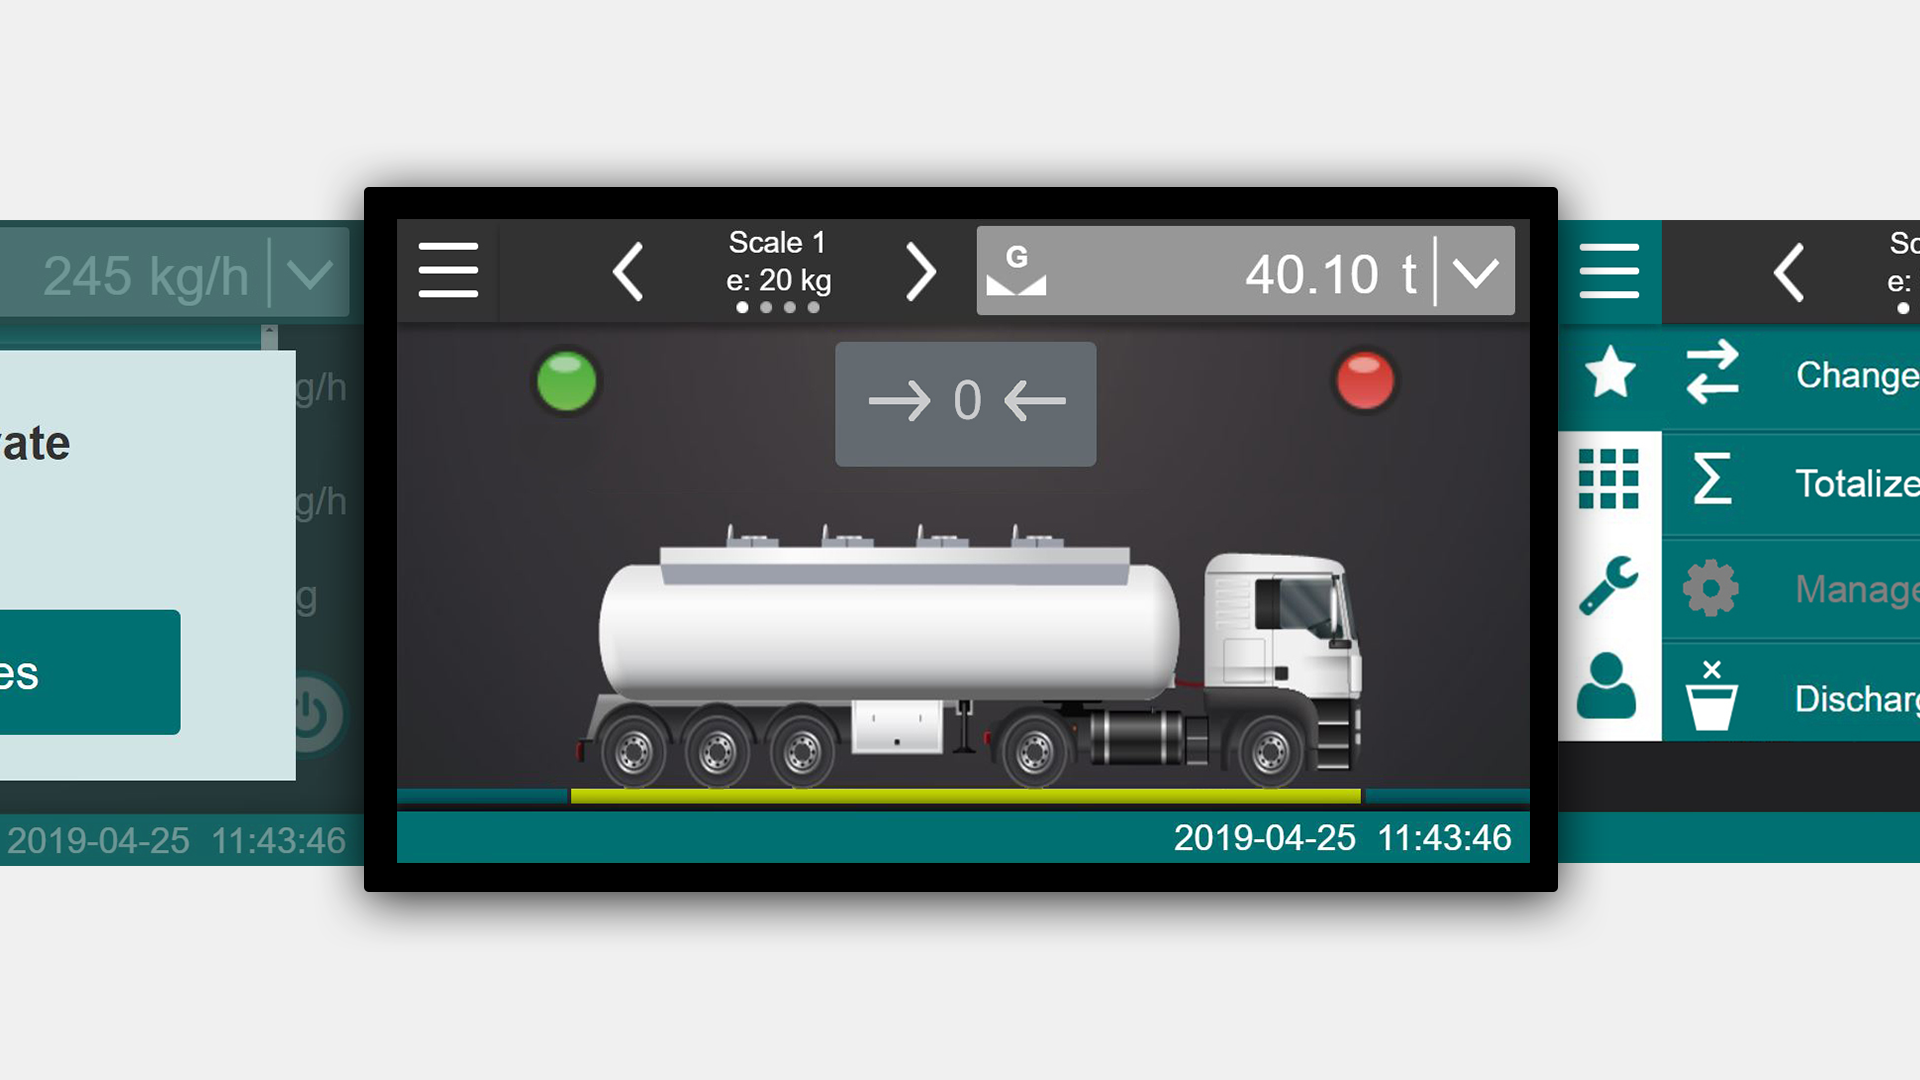 The user interface of the CONiQ weighing system. A truck is shown to be weighed.